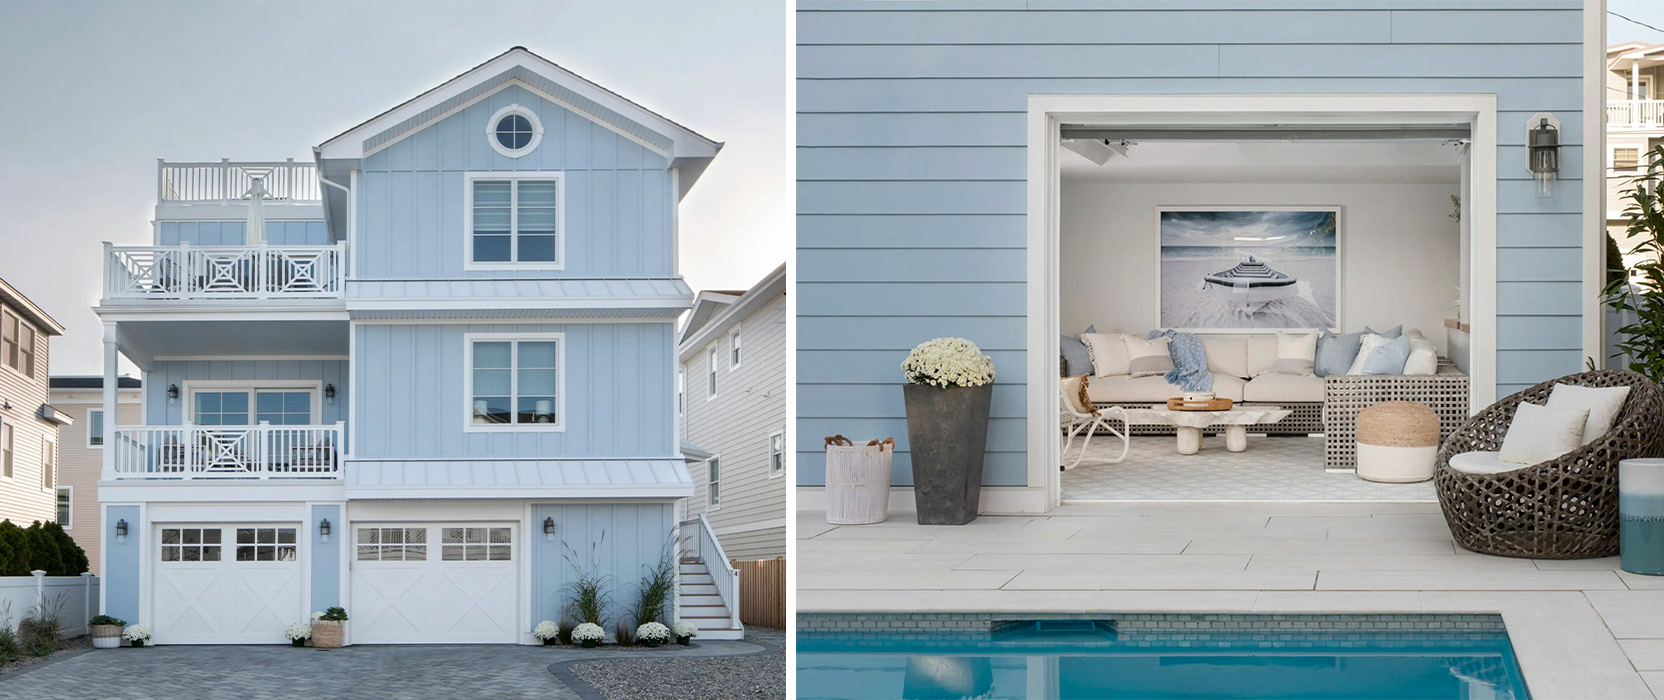  Coastal style home exterior painted light blue with white trim and multilevel balcony railings, including tighter shot of sitting area by pool accessed by garage door.